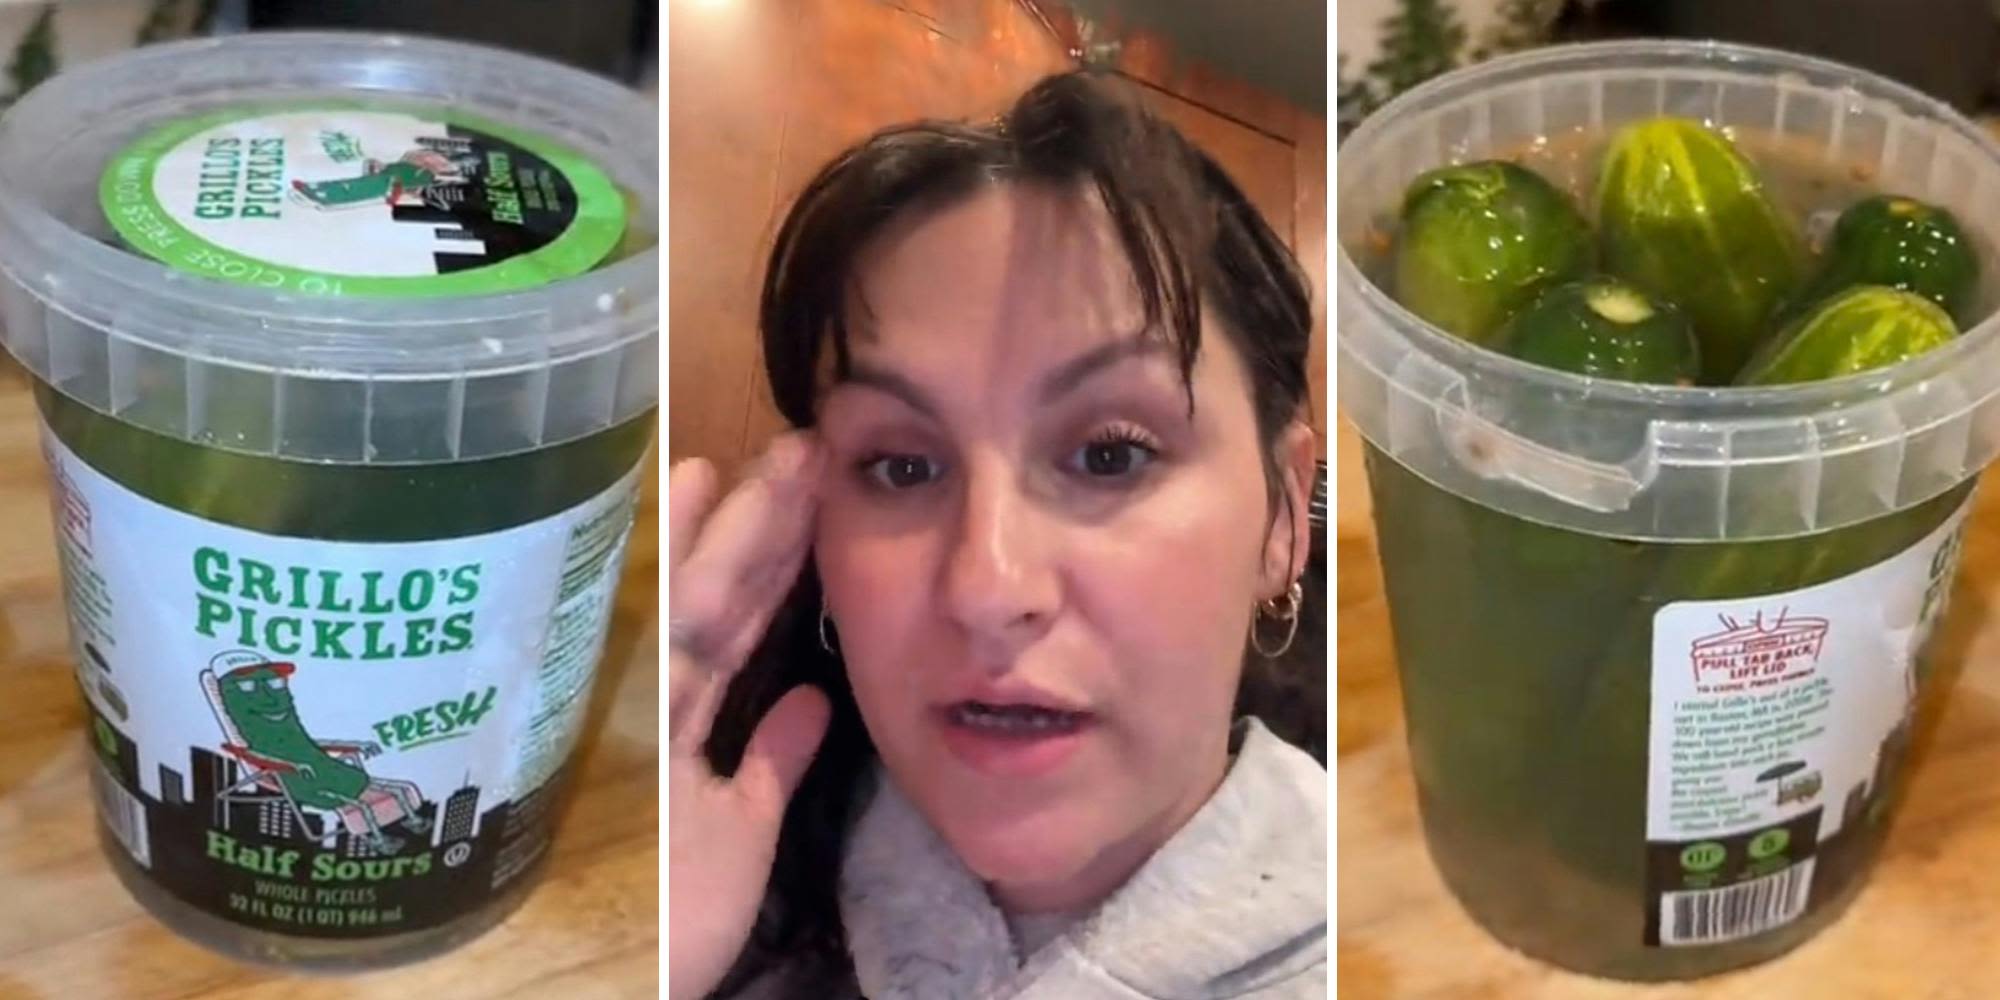 ‘I’m freaking out’: Customer drinks from jar of Grillo’s Pickles. Then she notices something strange